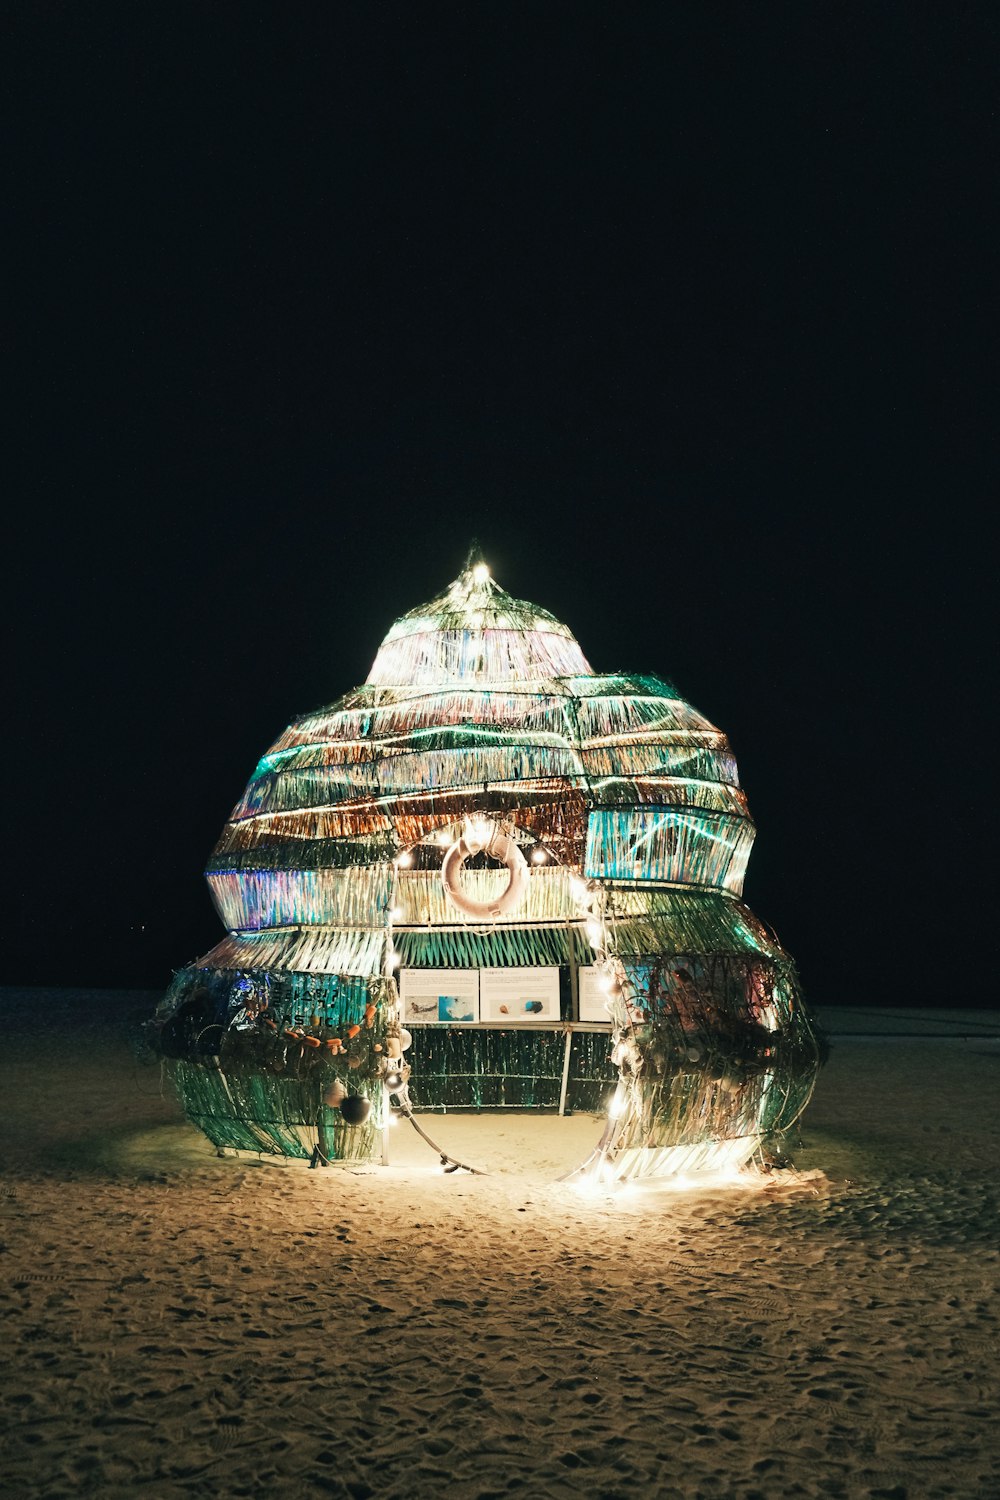 a building made out of plastic bottles on a beach